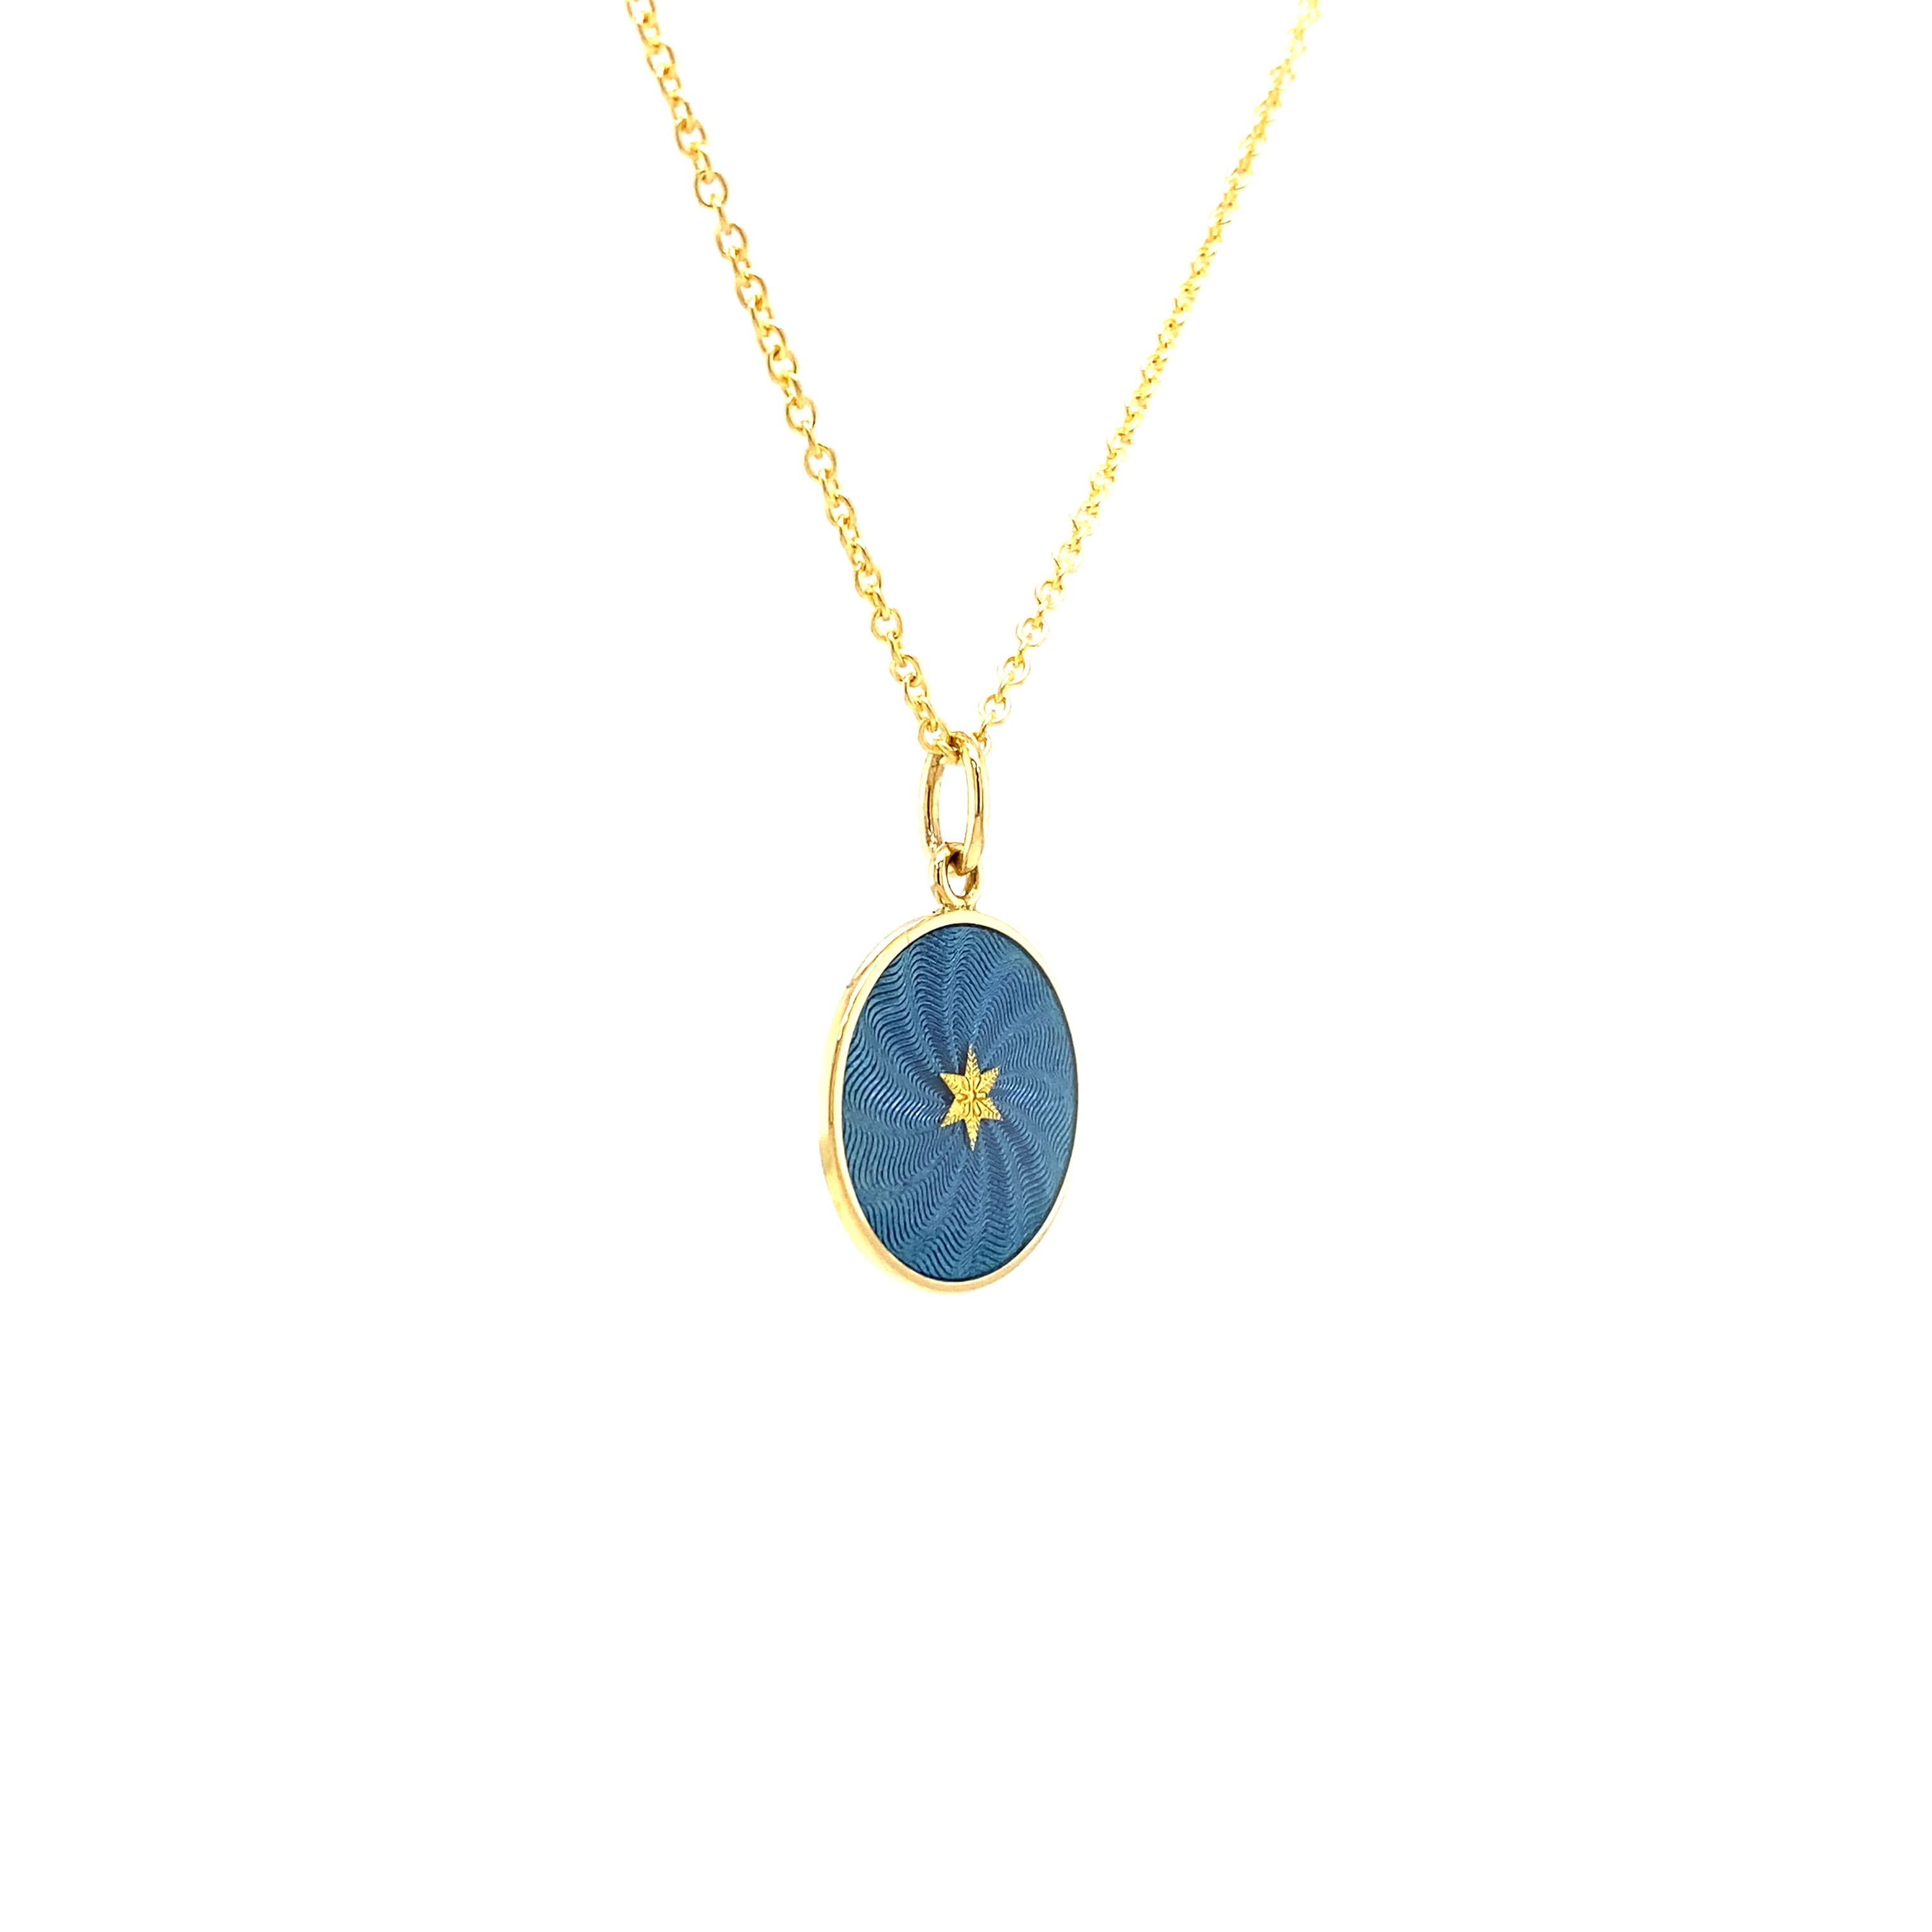 Round Disk Pendant 18k Yellow Gold - Blue Enamel Guilloche Paillons For Sale 3